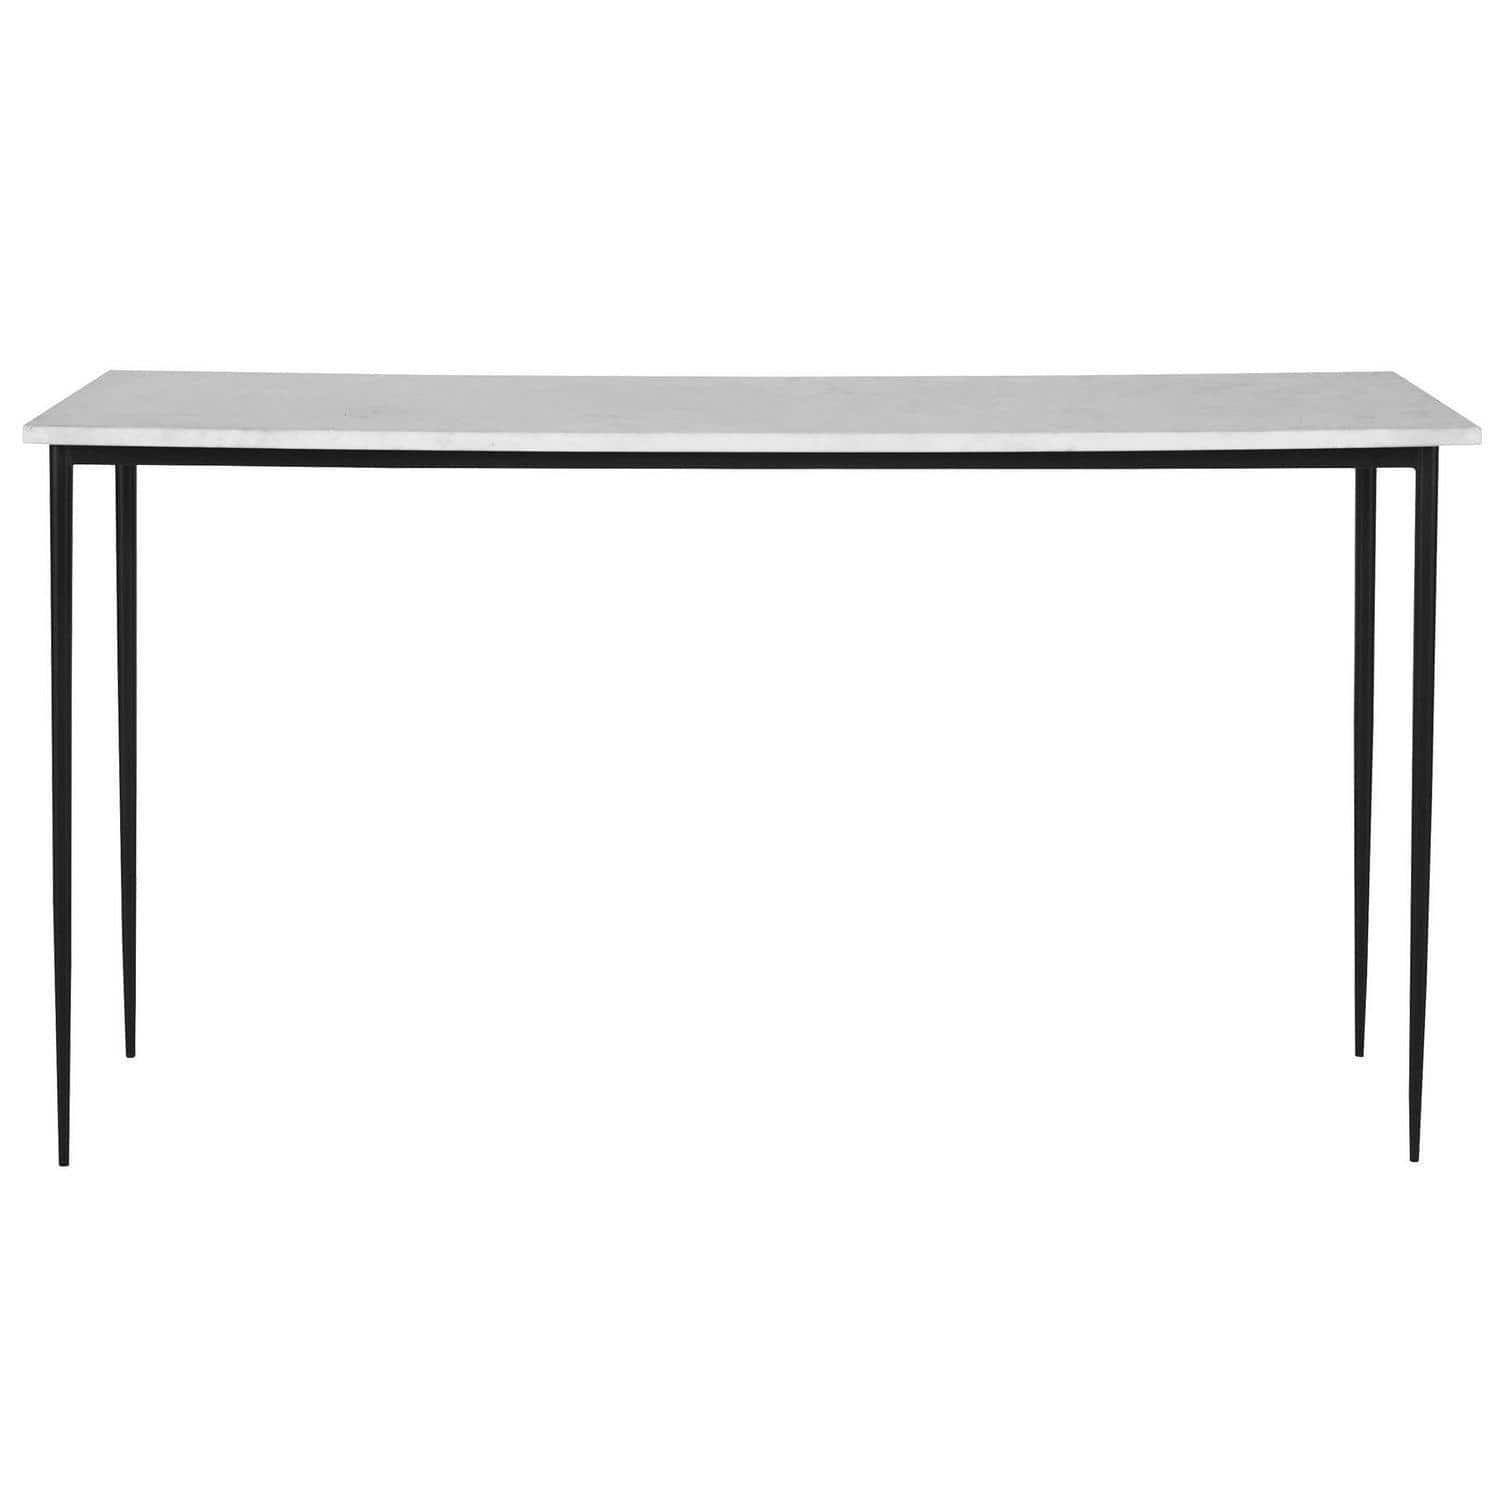 The Uttermost - Nightfall Console Table - 25173 | Montreal Lighting & Hardware